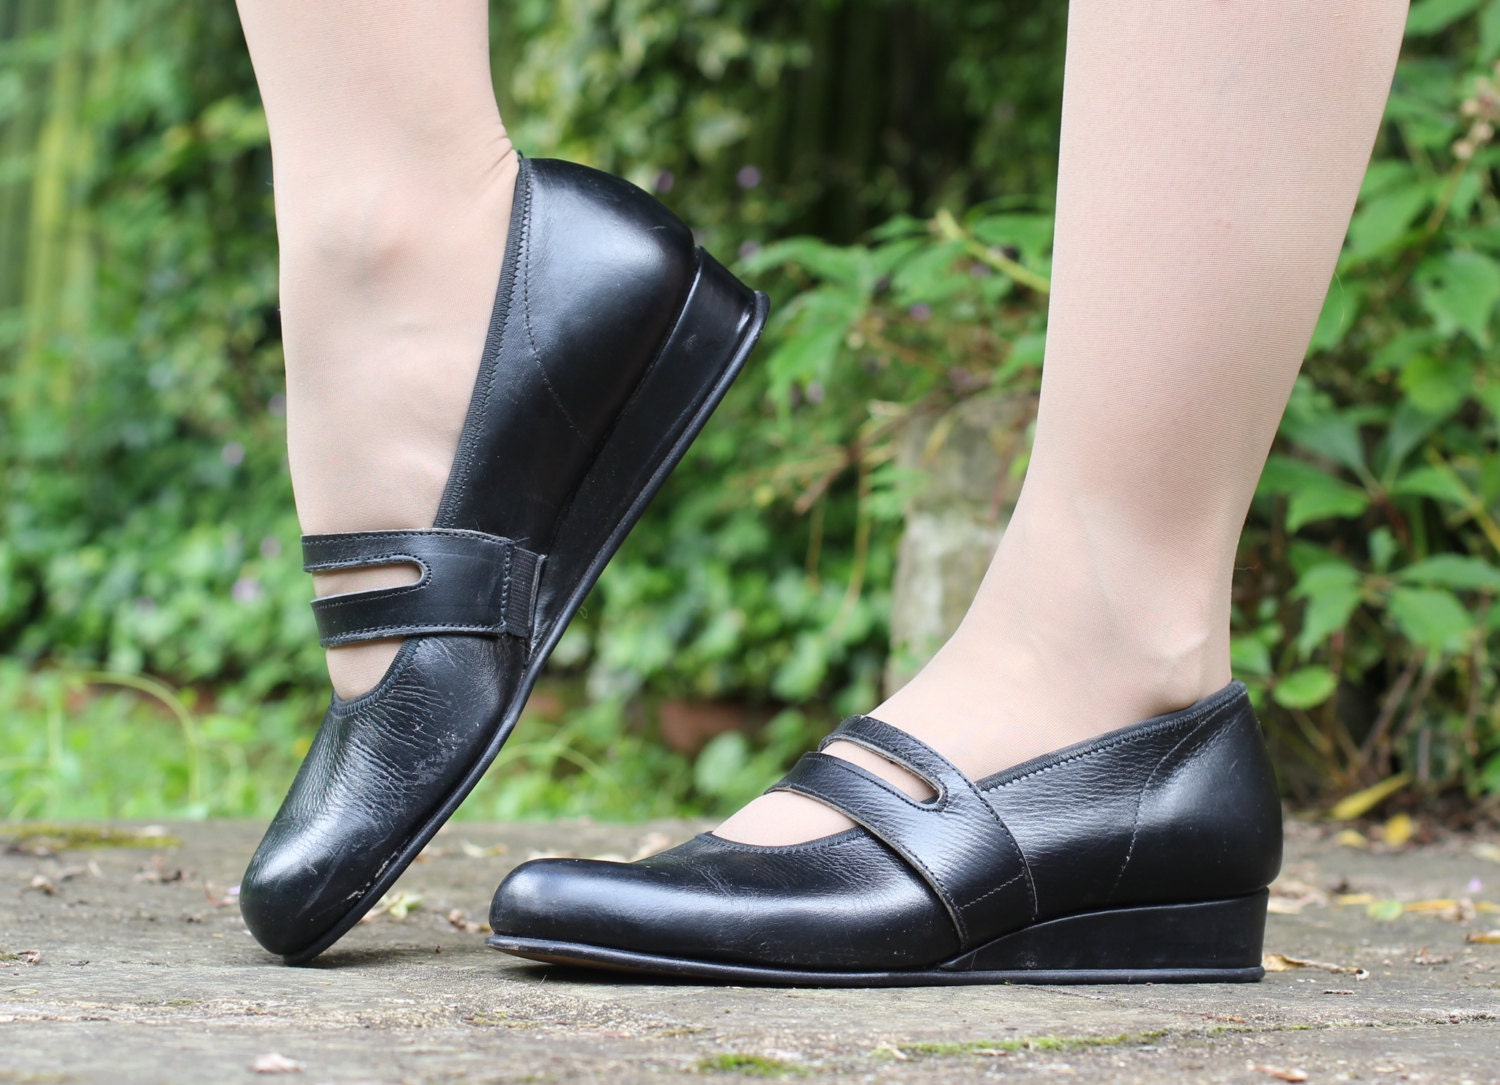  Vintage  1940s 40s Black Leather Mary  Jane  Double Strap Shoes 